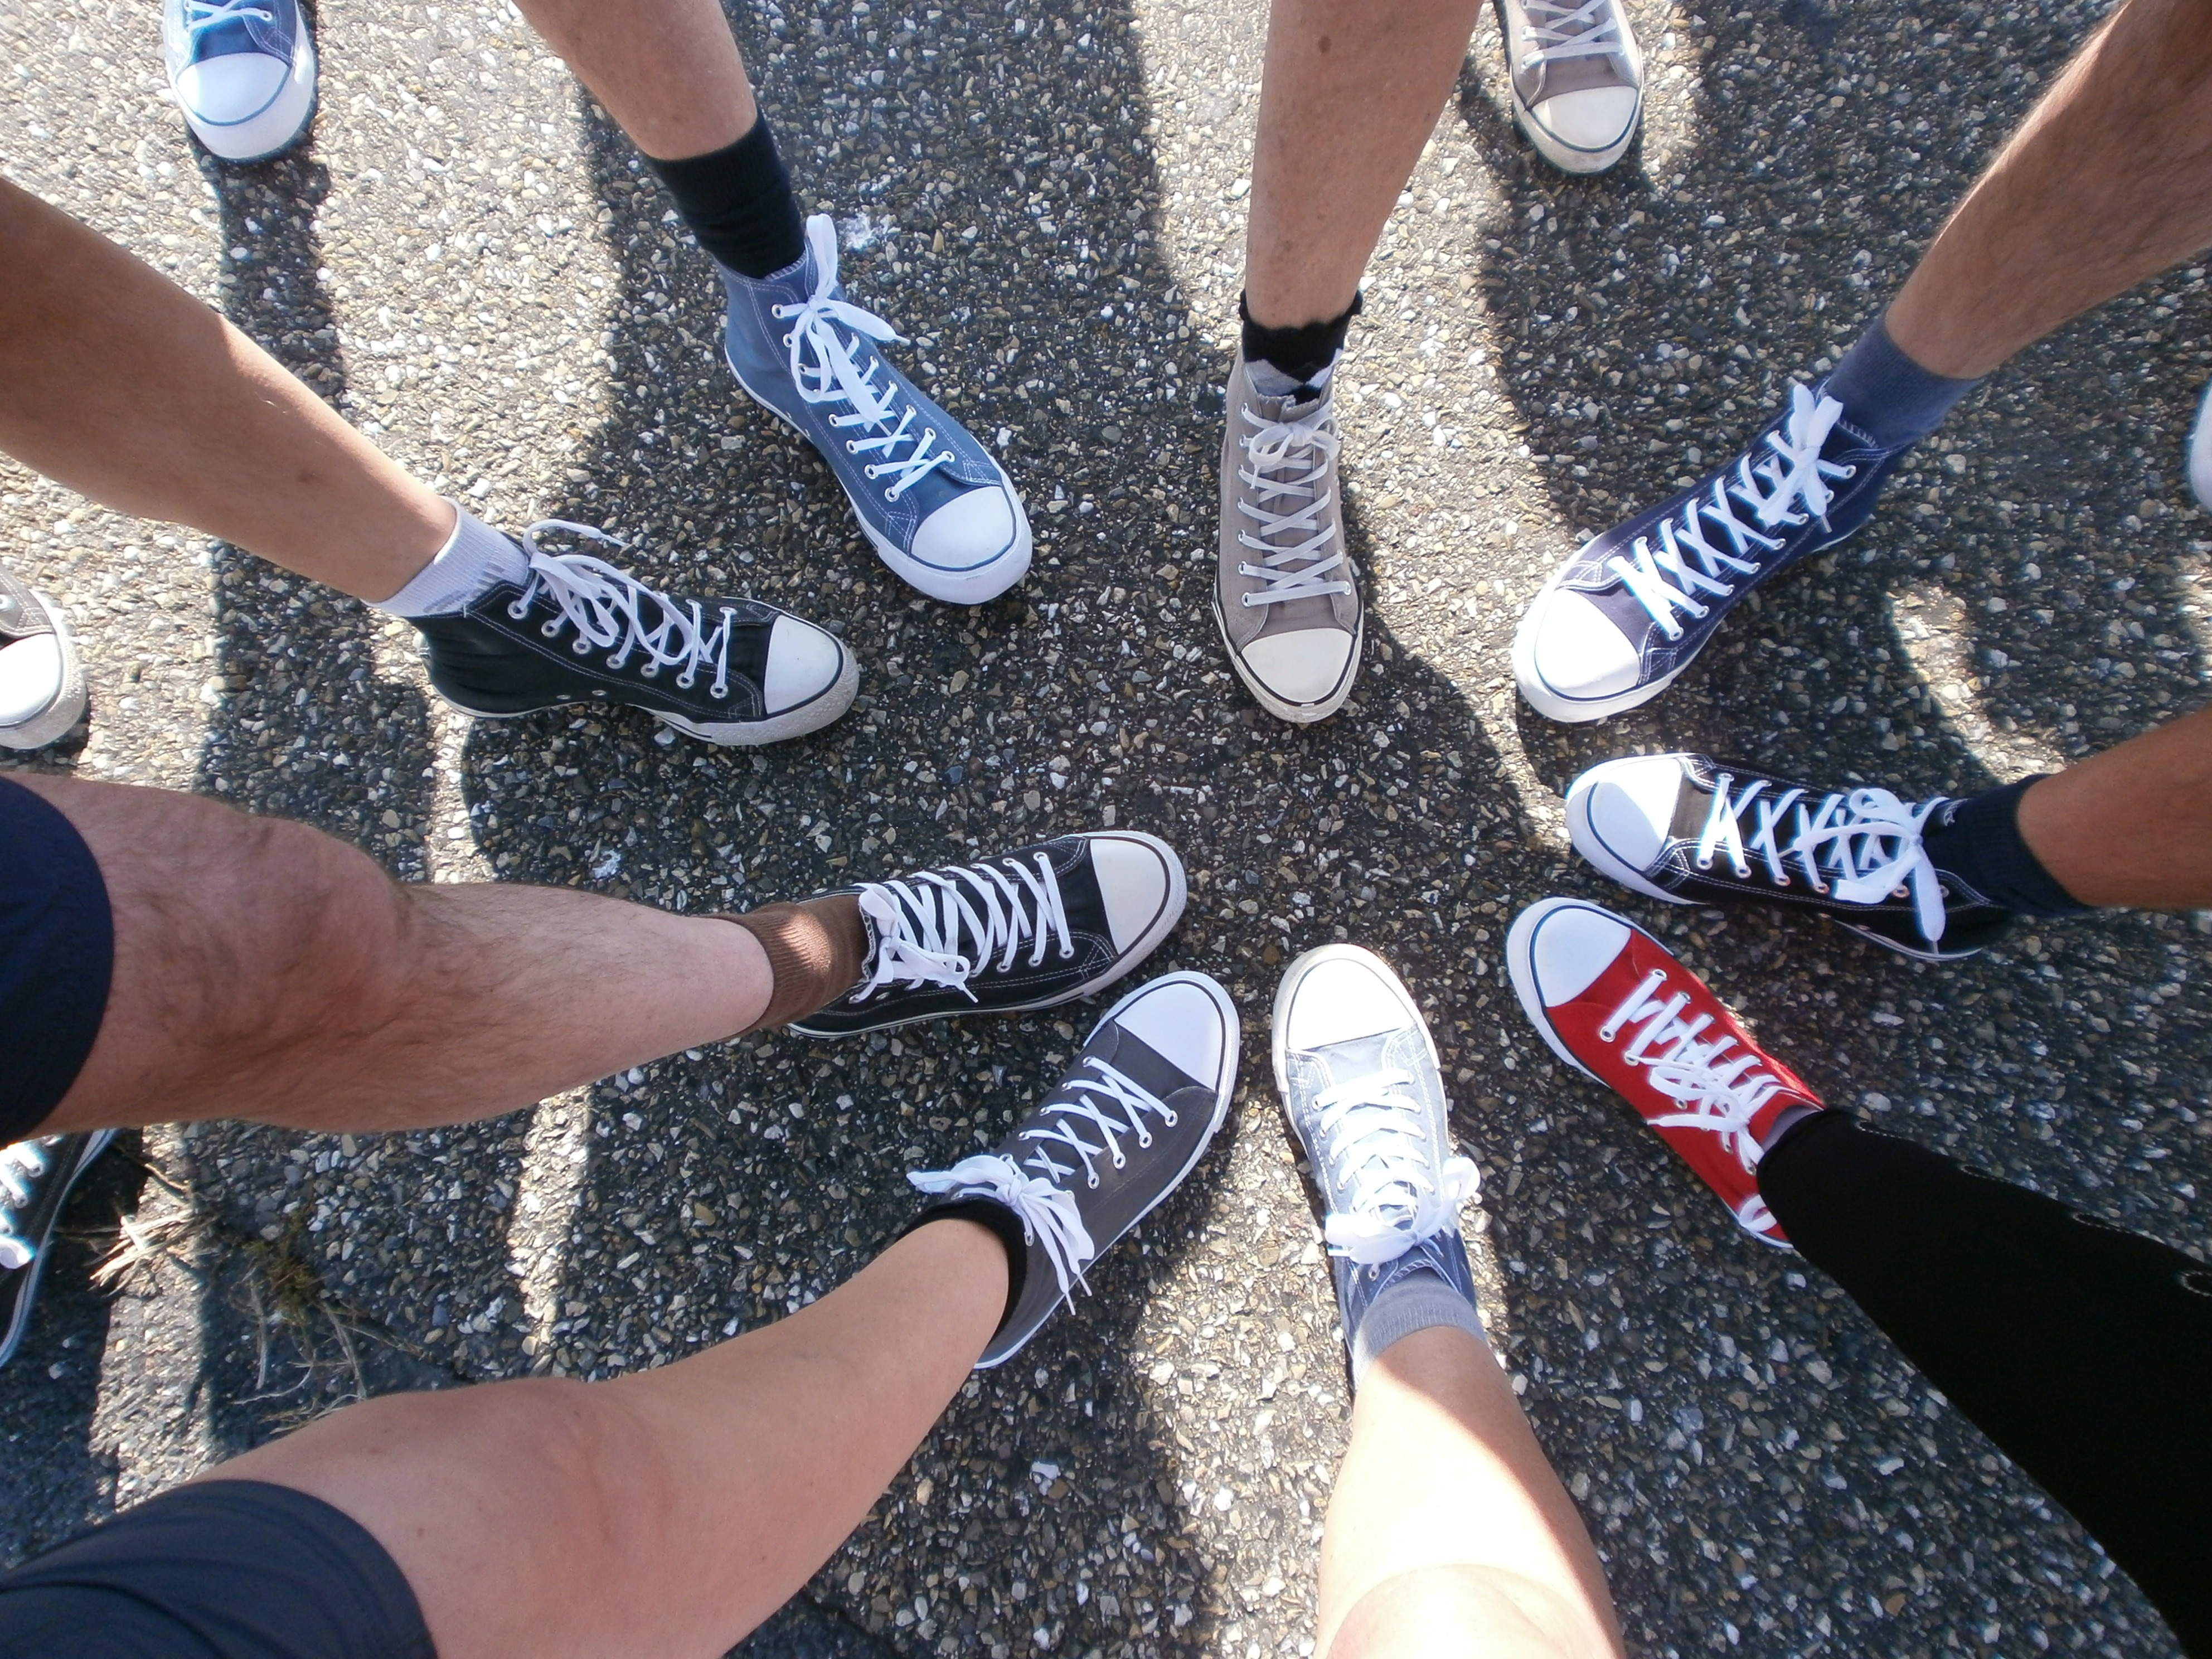 group of people wearing Converse All Star sneakers taking picture of sneakers